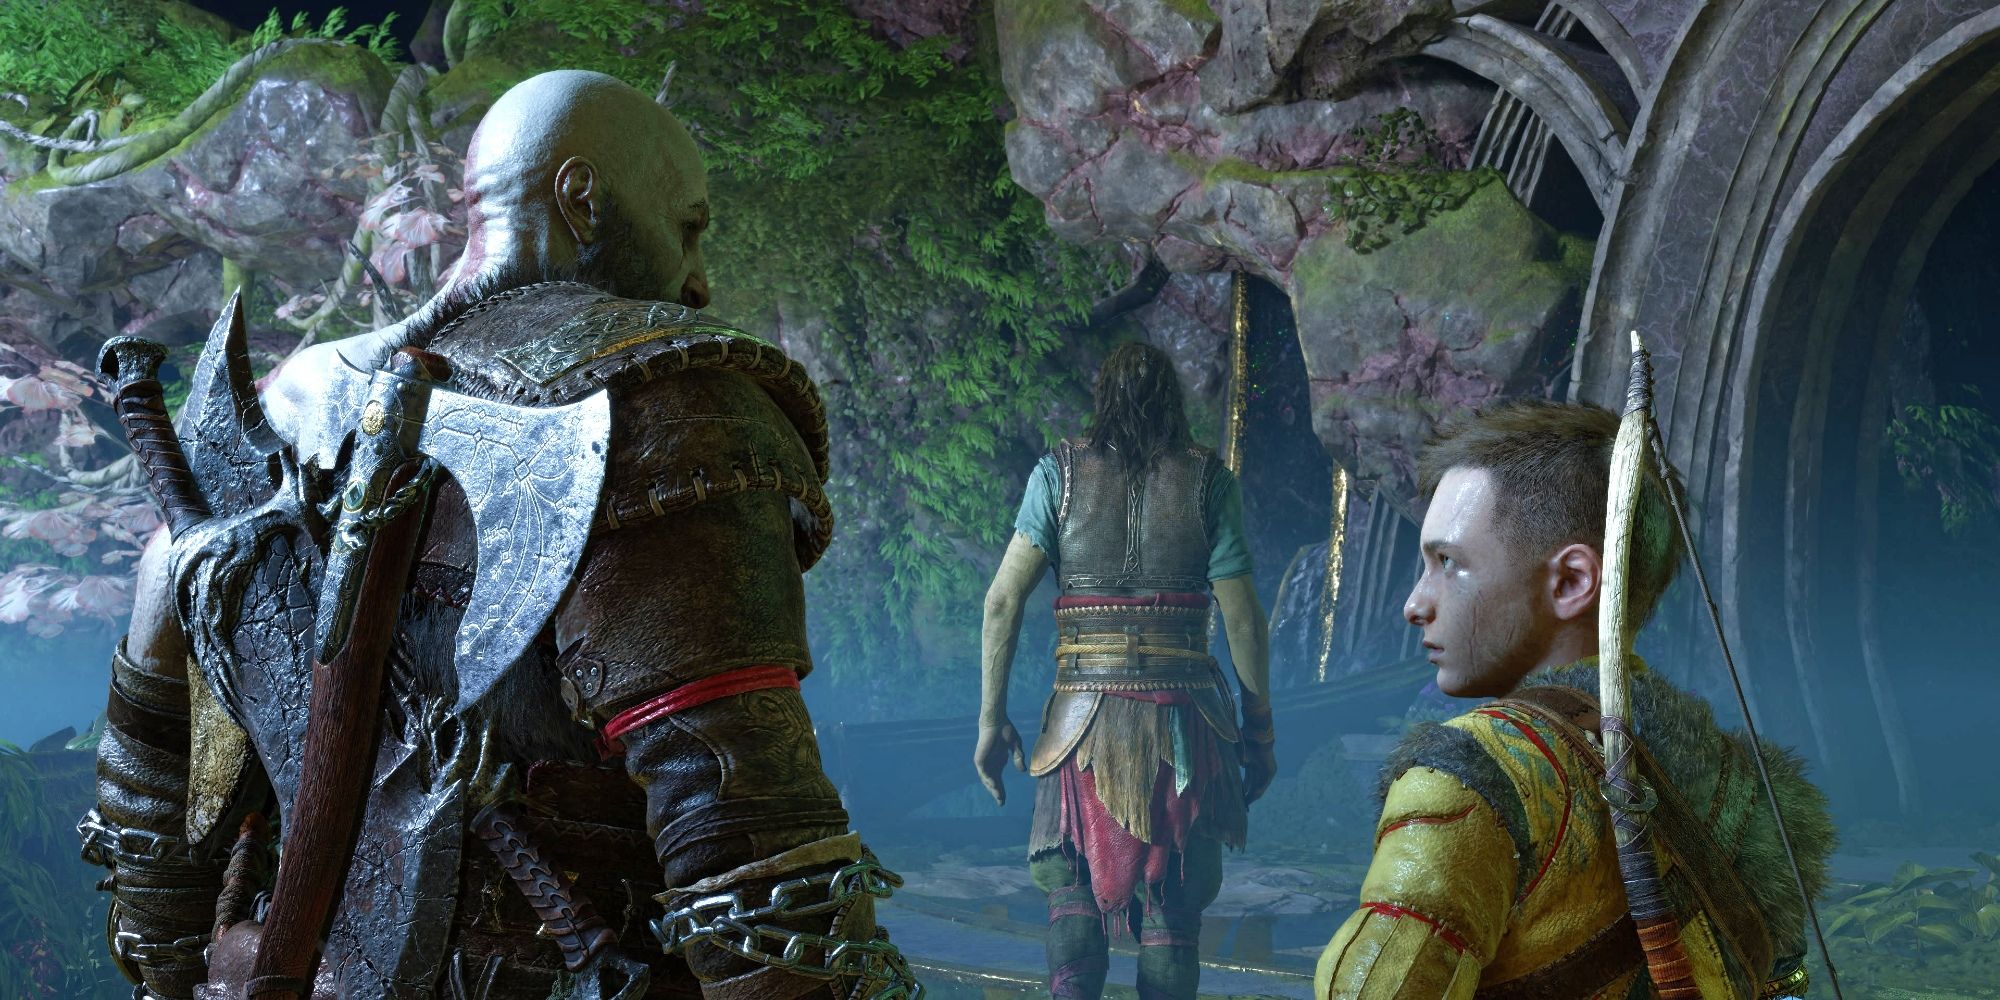 Image of Kratos and Atreus talking privately behind Tyr's back.